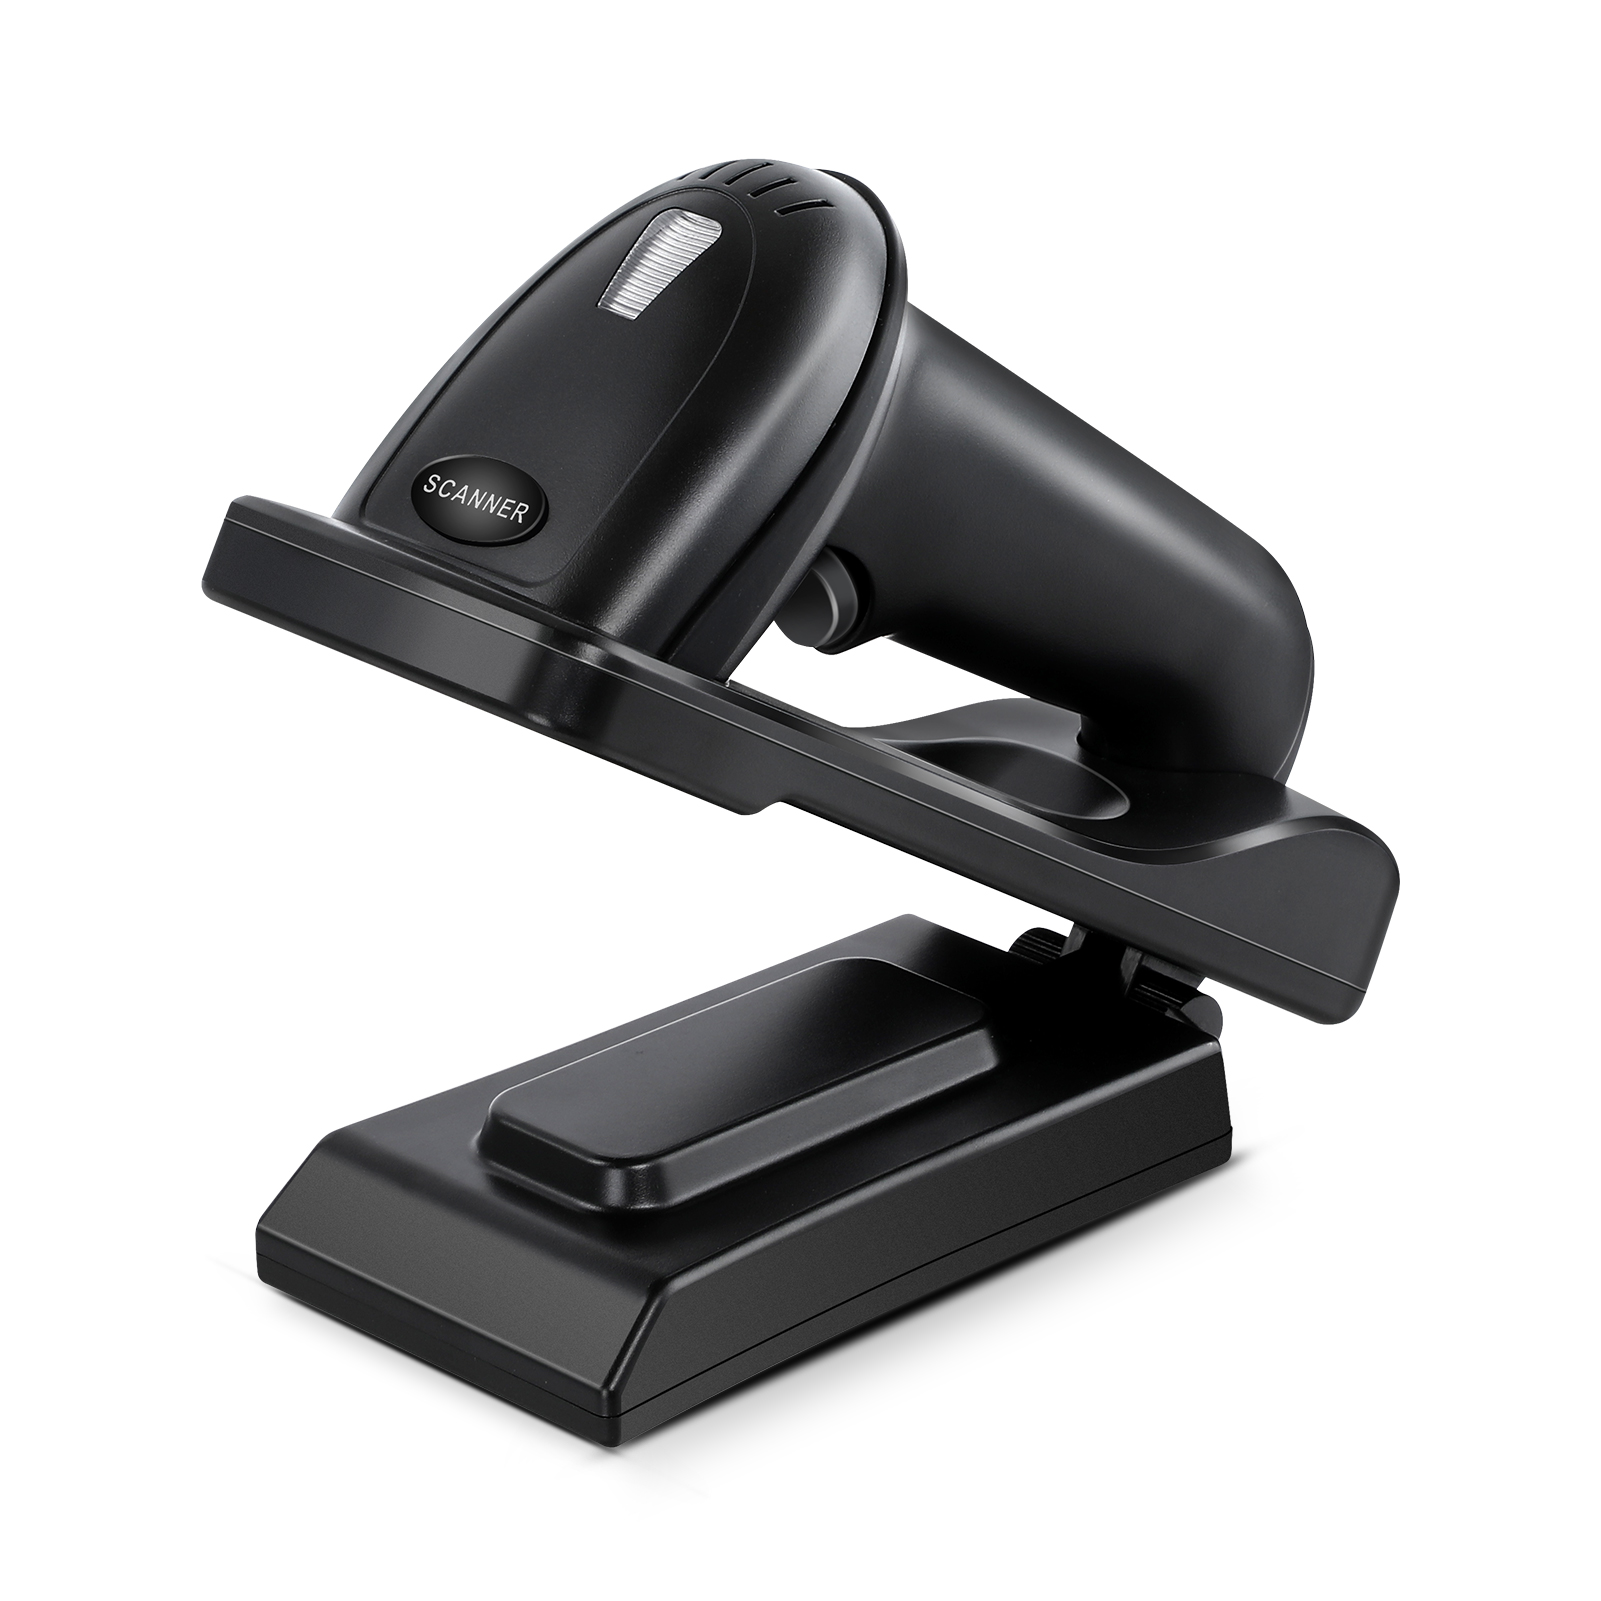 Evnvn Bluetooth Wireless Barcode Scanner Wall Mountable, 2.4G Wireless 1D QR 2D Bar Code Reader CMOS Screen Scanning PDF417 Data Matrix Scan with Adjustable Folding Stand and USB Charging Cradle